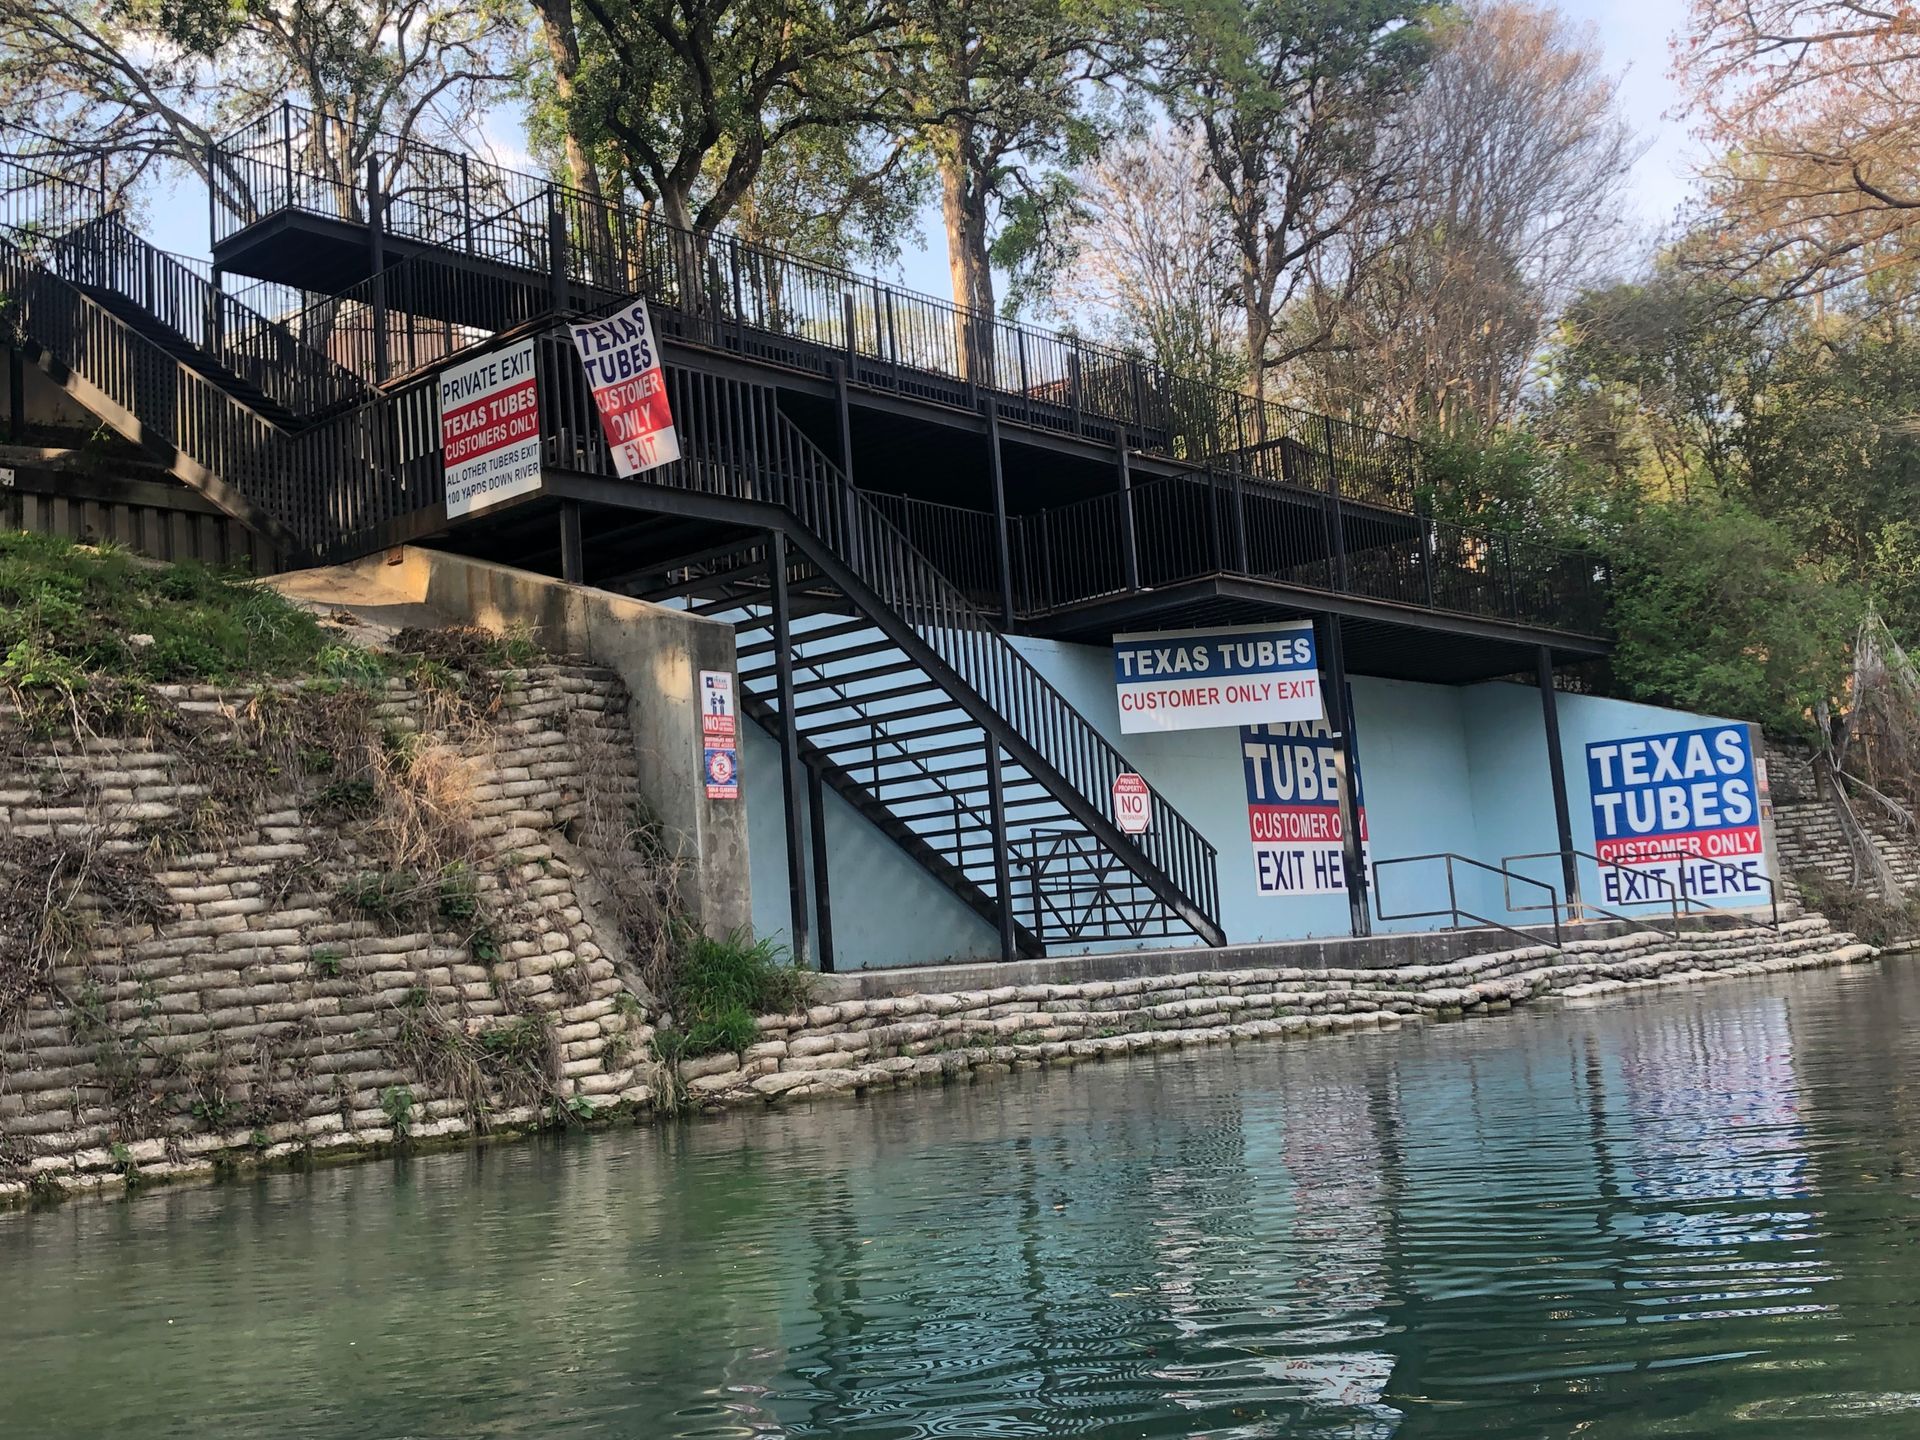 This is Texas Tubes' Private Comal River Float Trip EXIT for ALL Texas Tubes customers! EXIT HERE to catch your Shuttle ride back to Texas Tubes! New Braunfels